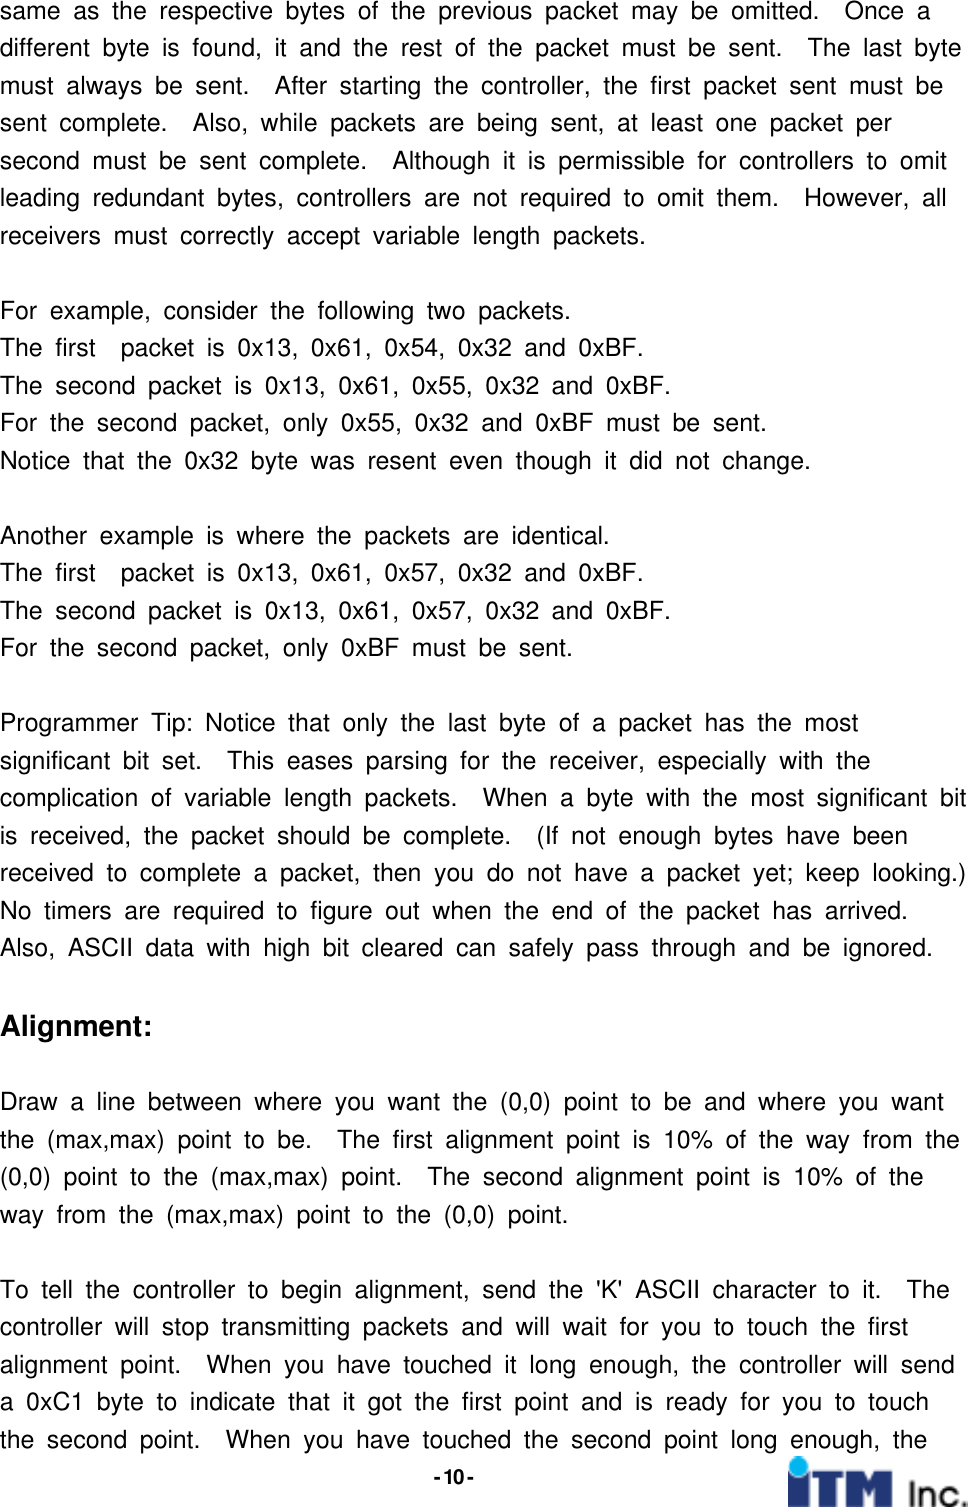 - 10 -same as the respective bytes of the previous packet may be omitted. Once adifferent byte is found, it and the rest of the packet must be sent. The last bytemust always be sent. After starting the controller, the first packet sent must besent complete. Also, while packets are being sent, at least one packet persecond must be sent complete. Although it is permissible for controllers to omitleading redundant bytes, controllers are not required to omit them. However, allreceivers must correctly accept variable length packets.For example, consider the following two packets.The first packet is 0x13, 0x61, 0x54, 0x32 and 0xBF.The second packet is 0x13, 0x61, 0x55, 0x32 and 0xBF.For the second packet, only 0x55, 0x32 and 0xBF must be sent.Notice that the 0x32 byte was resent even though it did not change.Another example is where the packets are identical.The first packet is 0x13, 0x61, 0x57, 0x32 and 0xBF.The second packet is 0x13, 0x61, 0x57, 0x32 and 0xBF.For the second packet, only 0xBF must be sent.Programmer Tip: Notice that only the last byte of a packet has the mostsignificant bit set. This eases parsing for the receiver, especially with thecomplication of variable length packets. When a byte with the most significant bitis received, the packet should be complete. (If not enough bytes have beenreceived to complete a packet, then you do not have a packet yet; keep looking.)No timers are required to figure out when the end of the packet has arrived.Also, ASCII data with high bit cleared can safely pass through and be ignored.Alignment:Draw a line between where you want the (0,0) point to be and where you wantthe (max,max) point to be. The first alignment point is 10% of the way from the(0,0) point to the (max,max) point. The second alignment point is 10% of theway from the (max,max) point to the (0,0) point.To tell the controller to begin alignment, send the &apos;K&apos; ASCII character to it. Thecontroller will stop transmitting packets and will wait for you to touch the firstalignment point. When you have touched it long enough, the controller will senda 0xC1 byte to indicate that it got the first point and is ready for you to touchthe second point. When you have touched the second point long enough, the